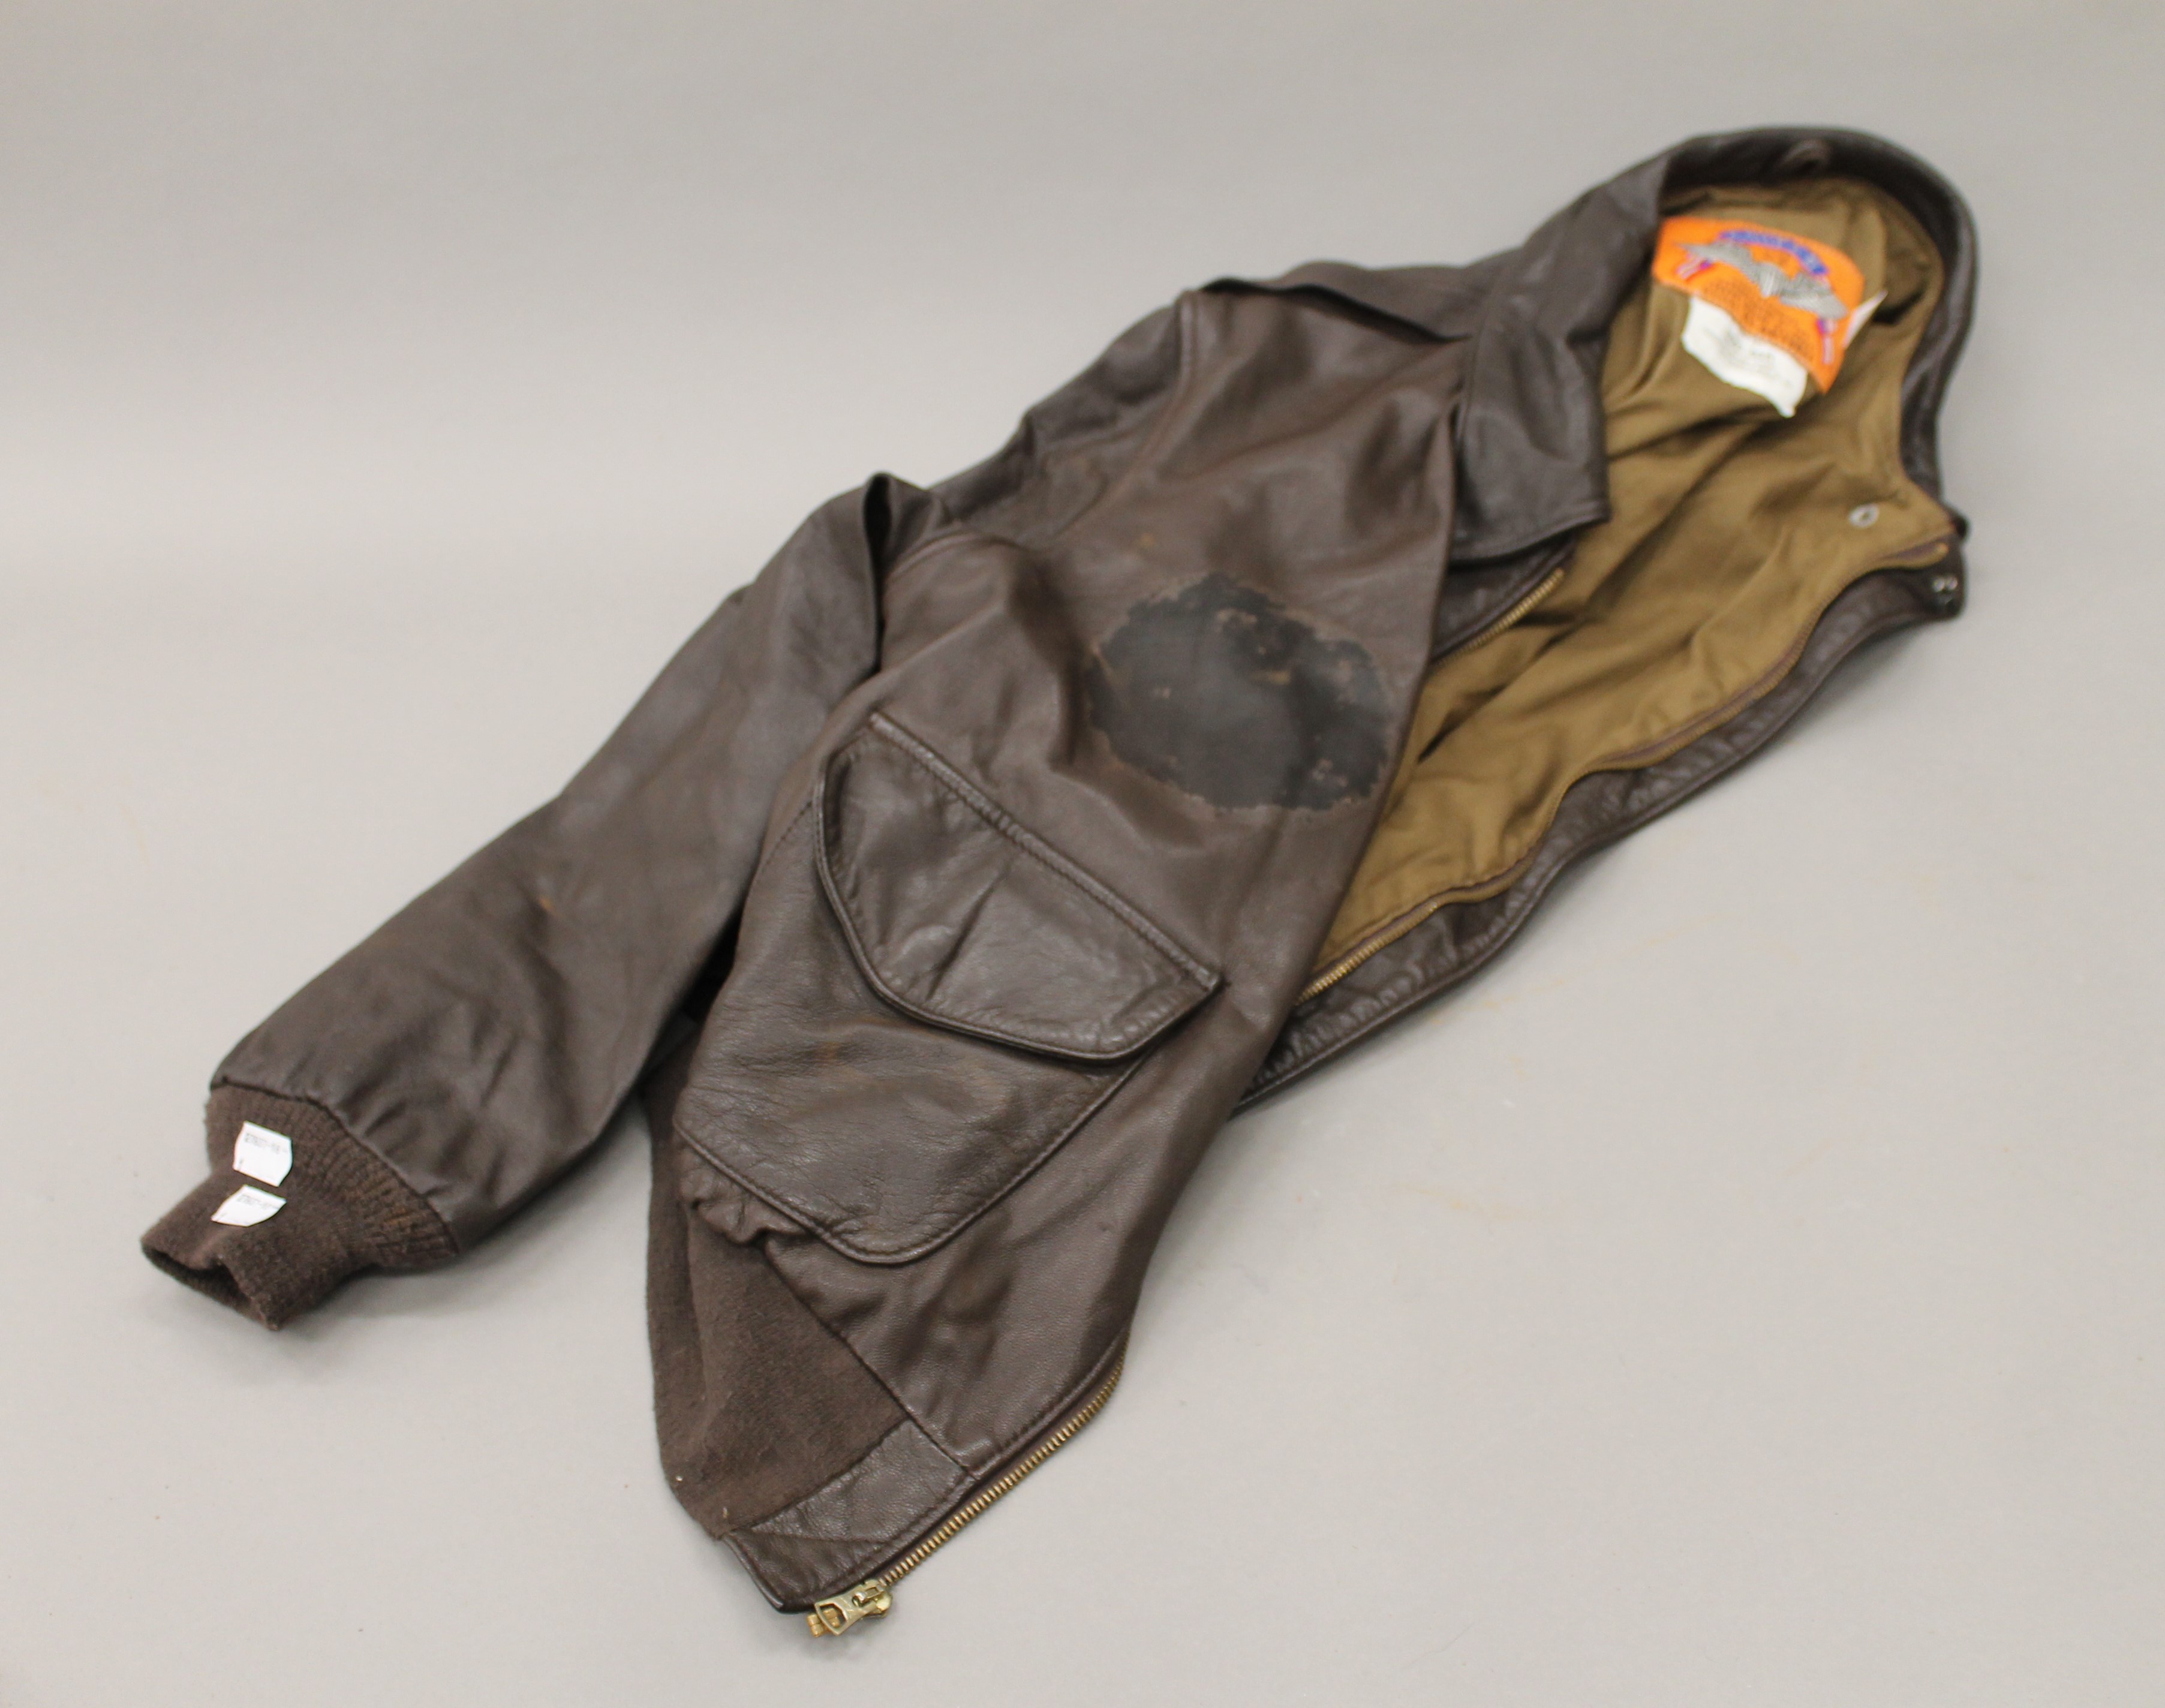 A vintage Cooper Type A.2 US Airforce leather bomber jacket. Size 46R.